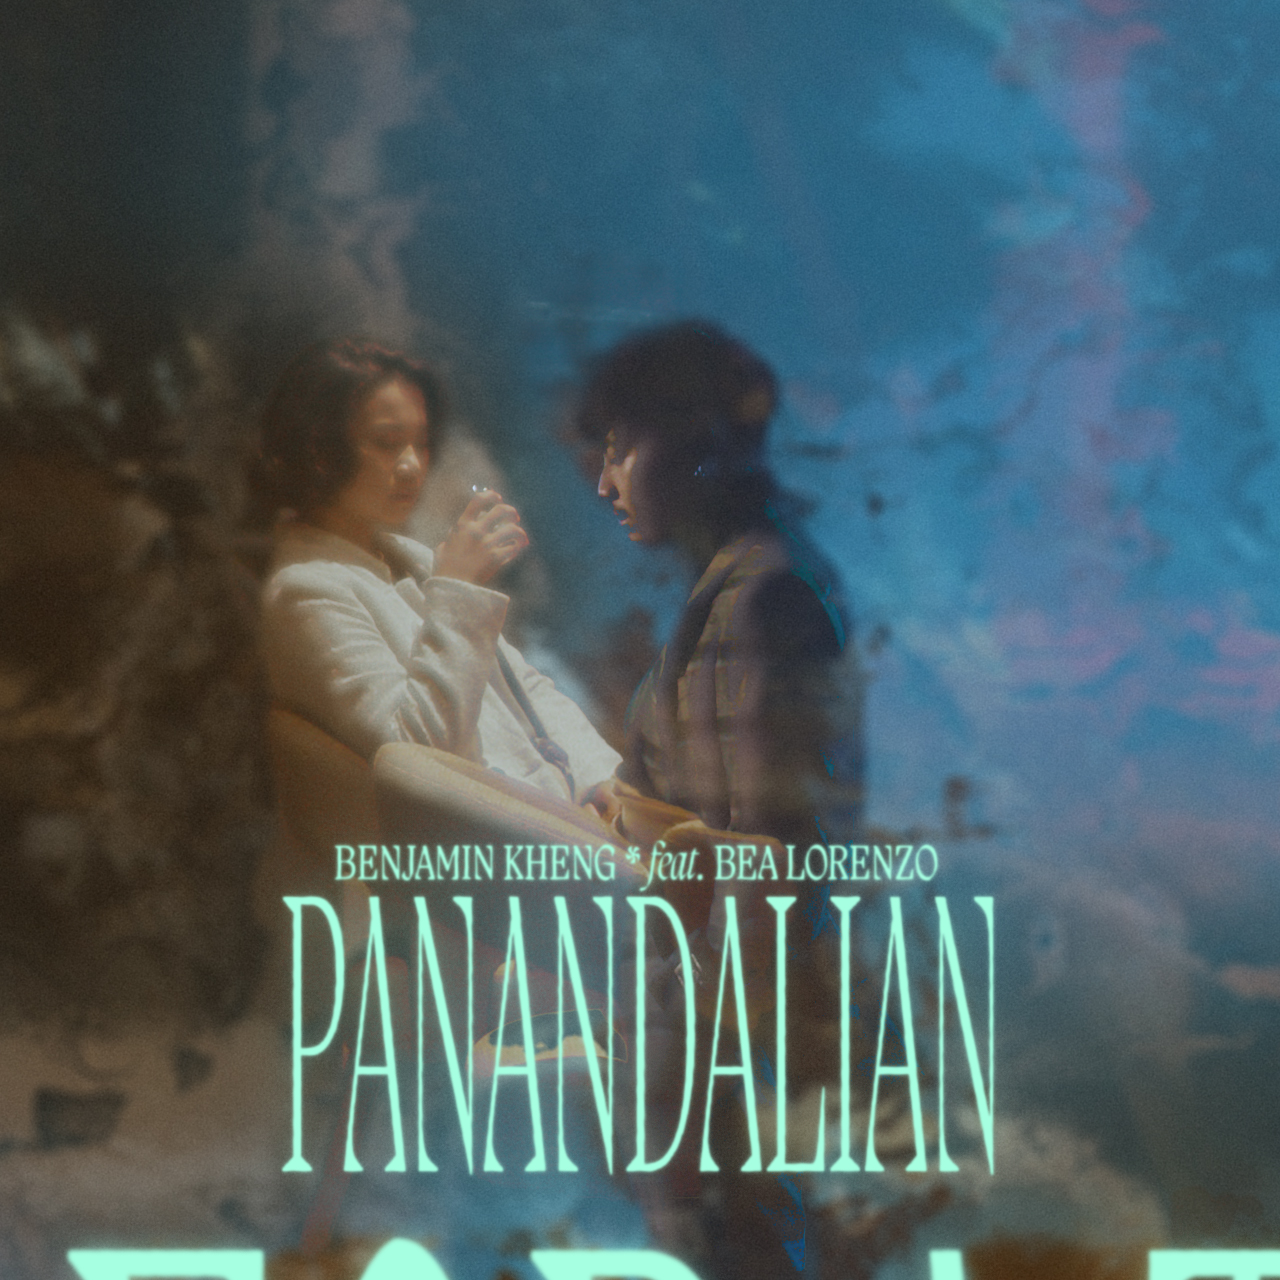 Filipina singer-songwriter Bea Lorenzo and Singapore-based artist Benjamin Kheng team up one more time with new song “Panandalian”